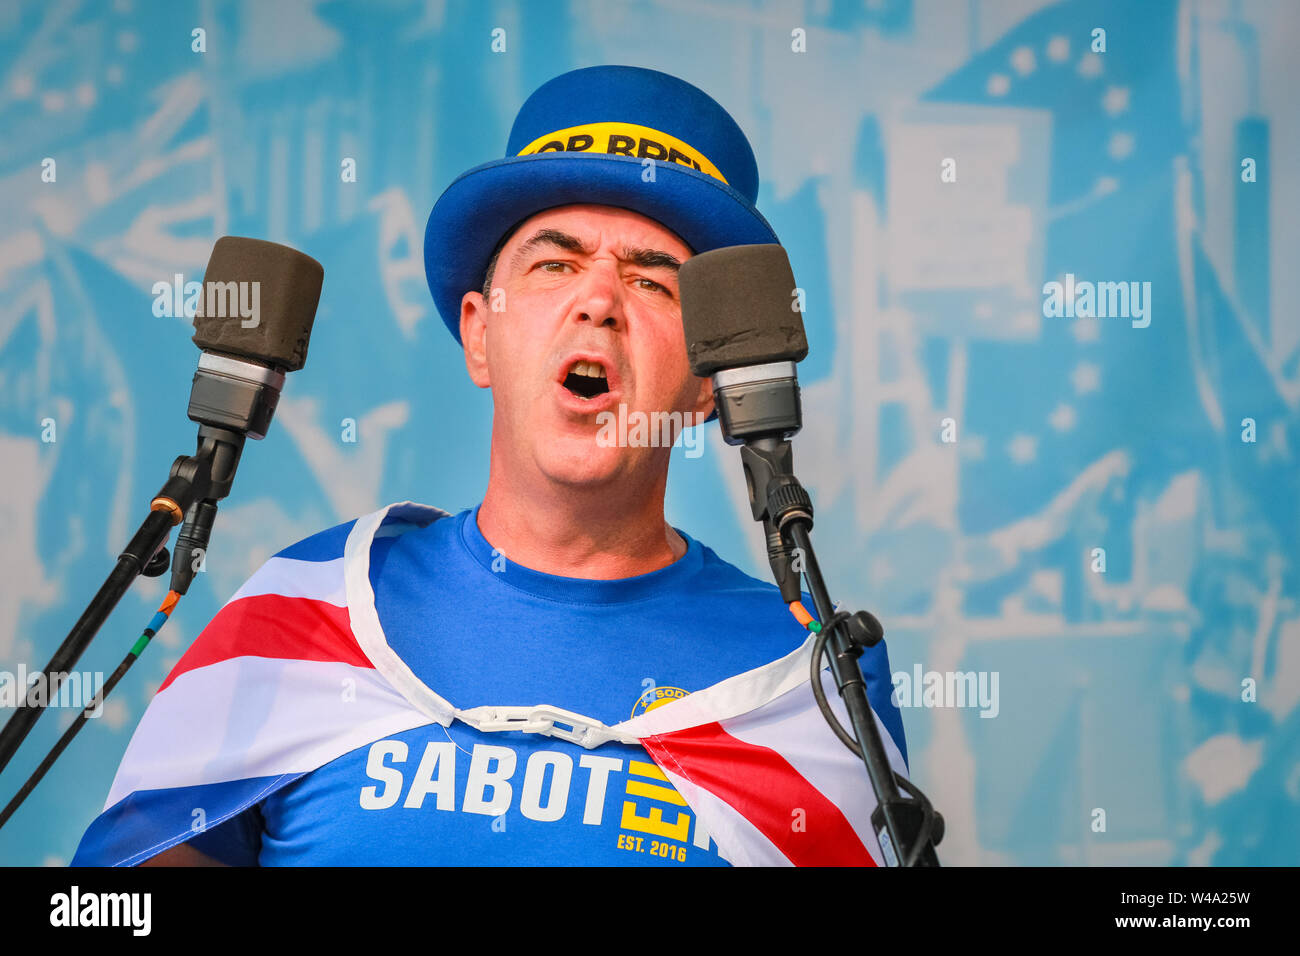 Steven (Steve) Bray, anti-Brexit activist at SODEM founder, speaks on stage at the 'March for Change' anti-Brexit protest in Westminster, London, UK Stock Photo